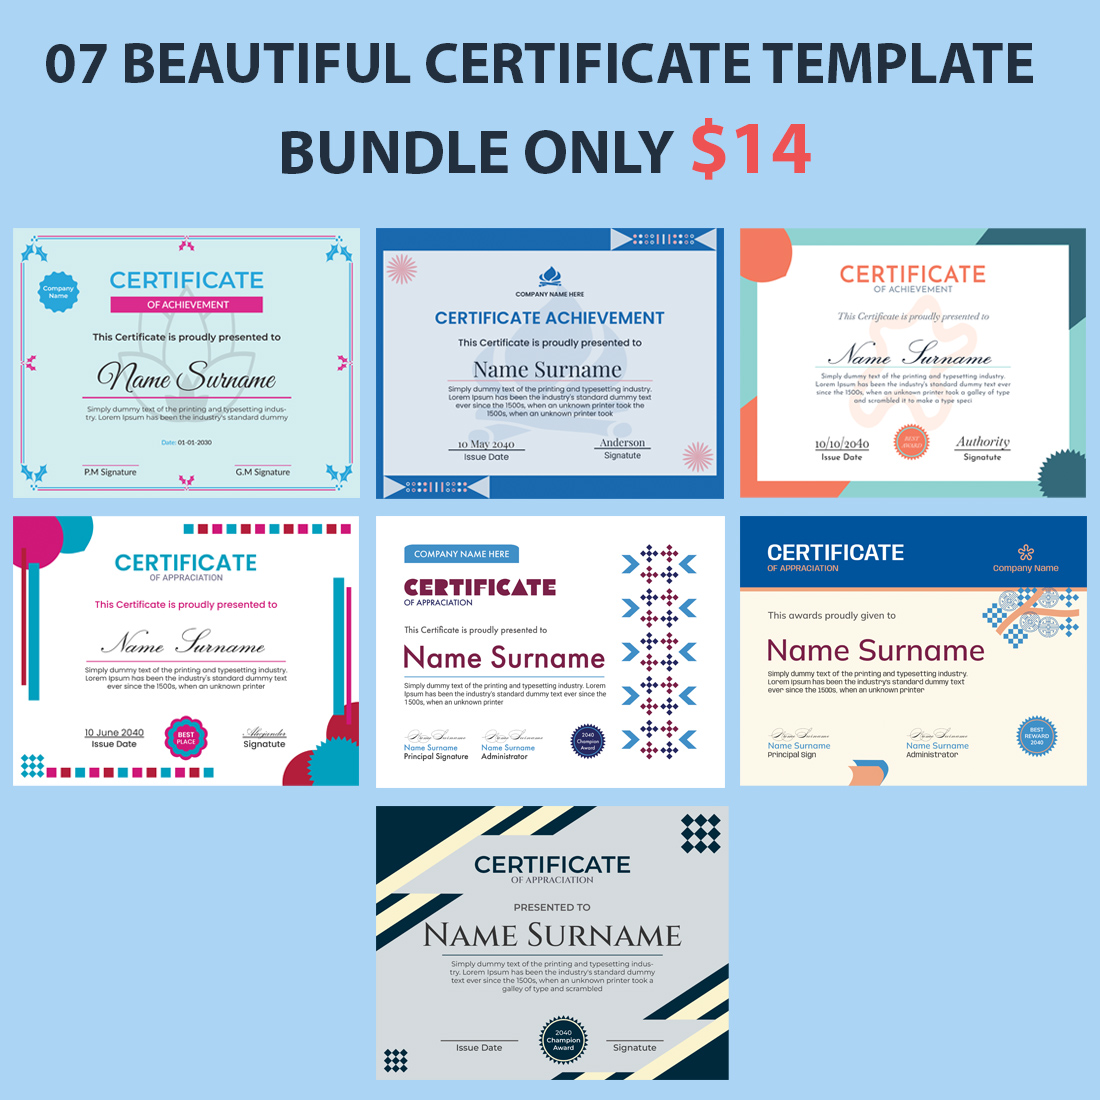 07 BEAUTIFUL CERTIFICATE TEMPLATE BUNDLE ONLY $14 preview image.